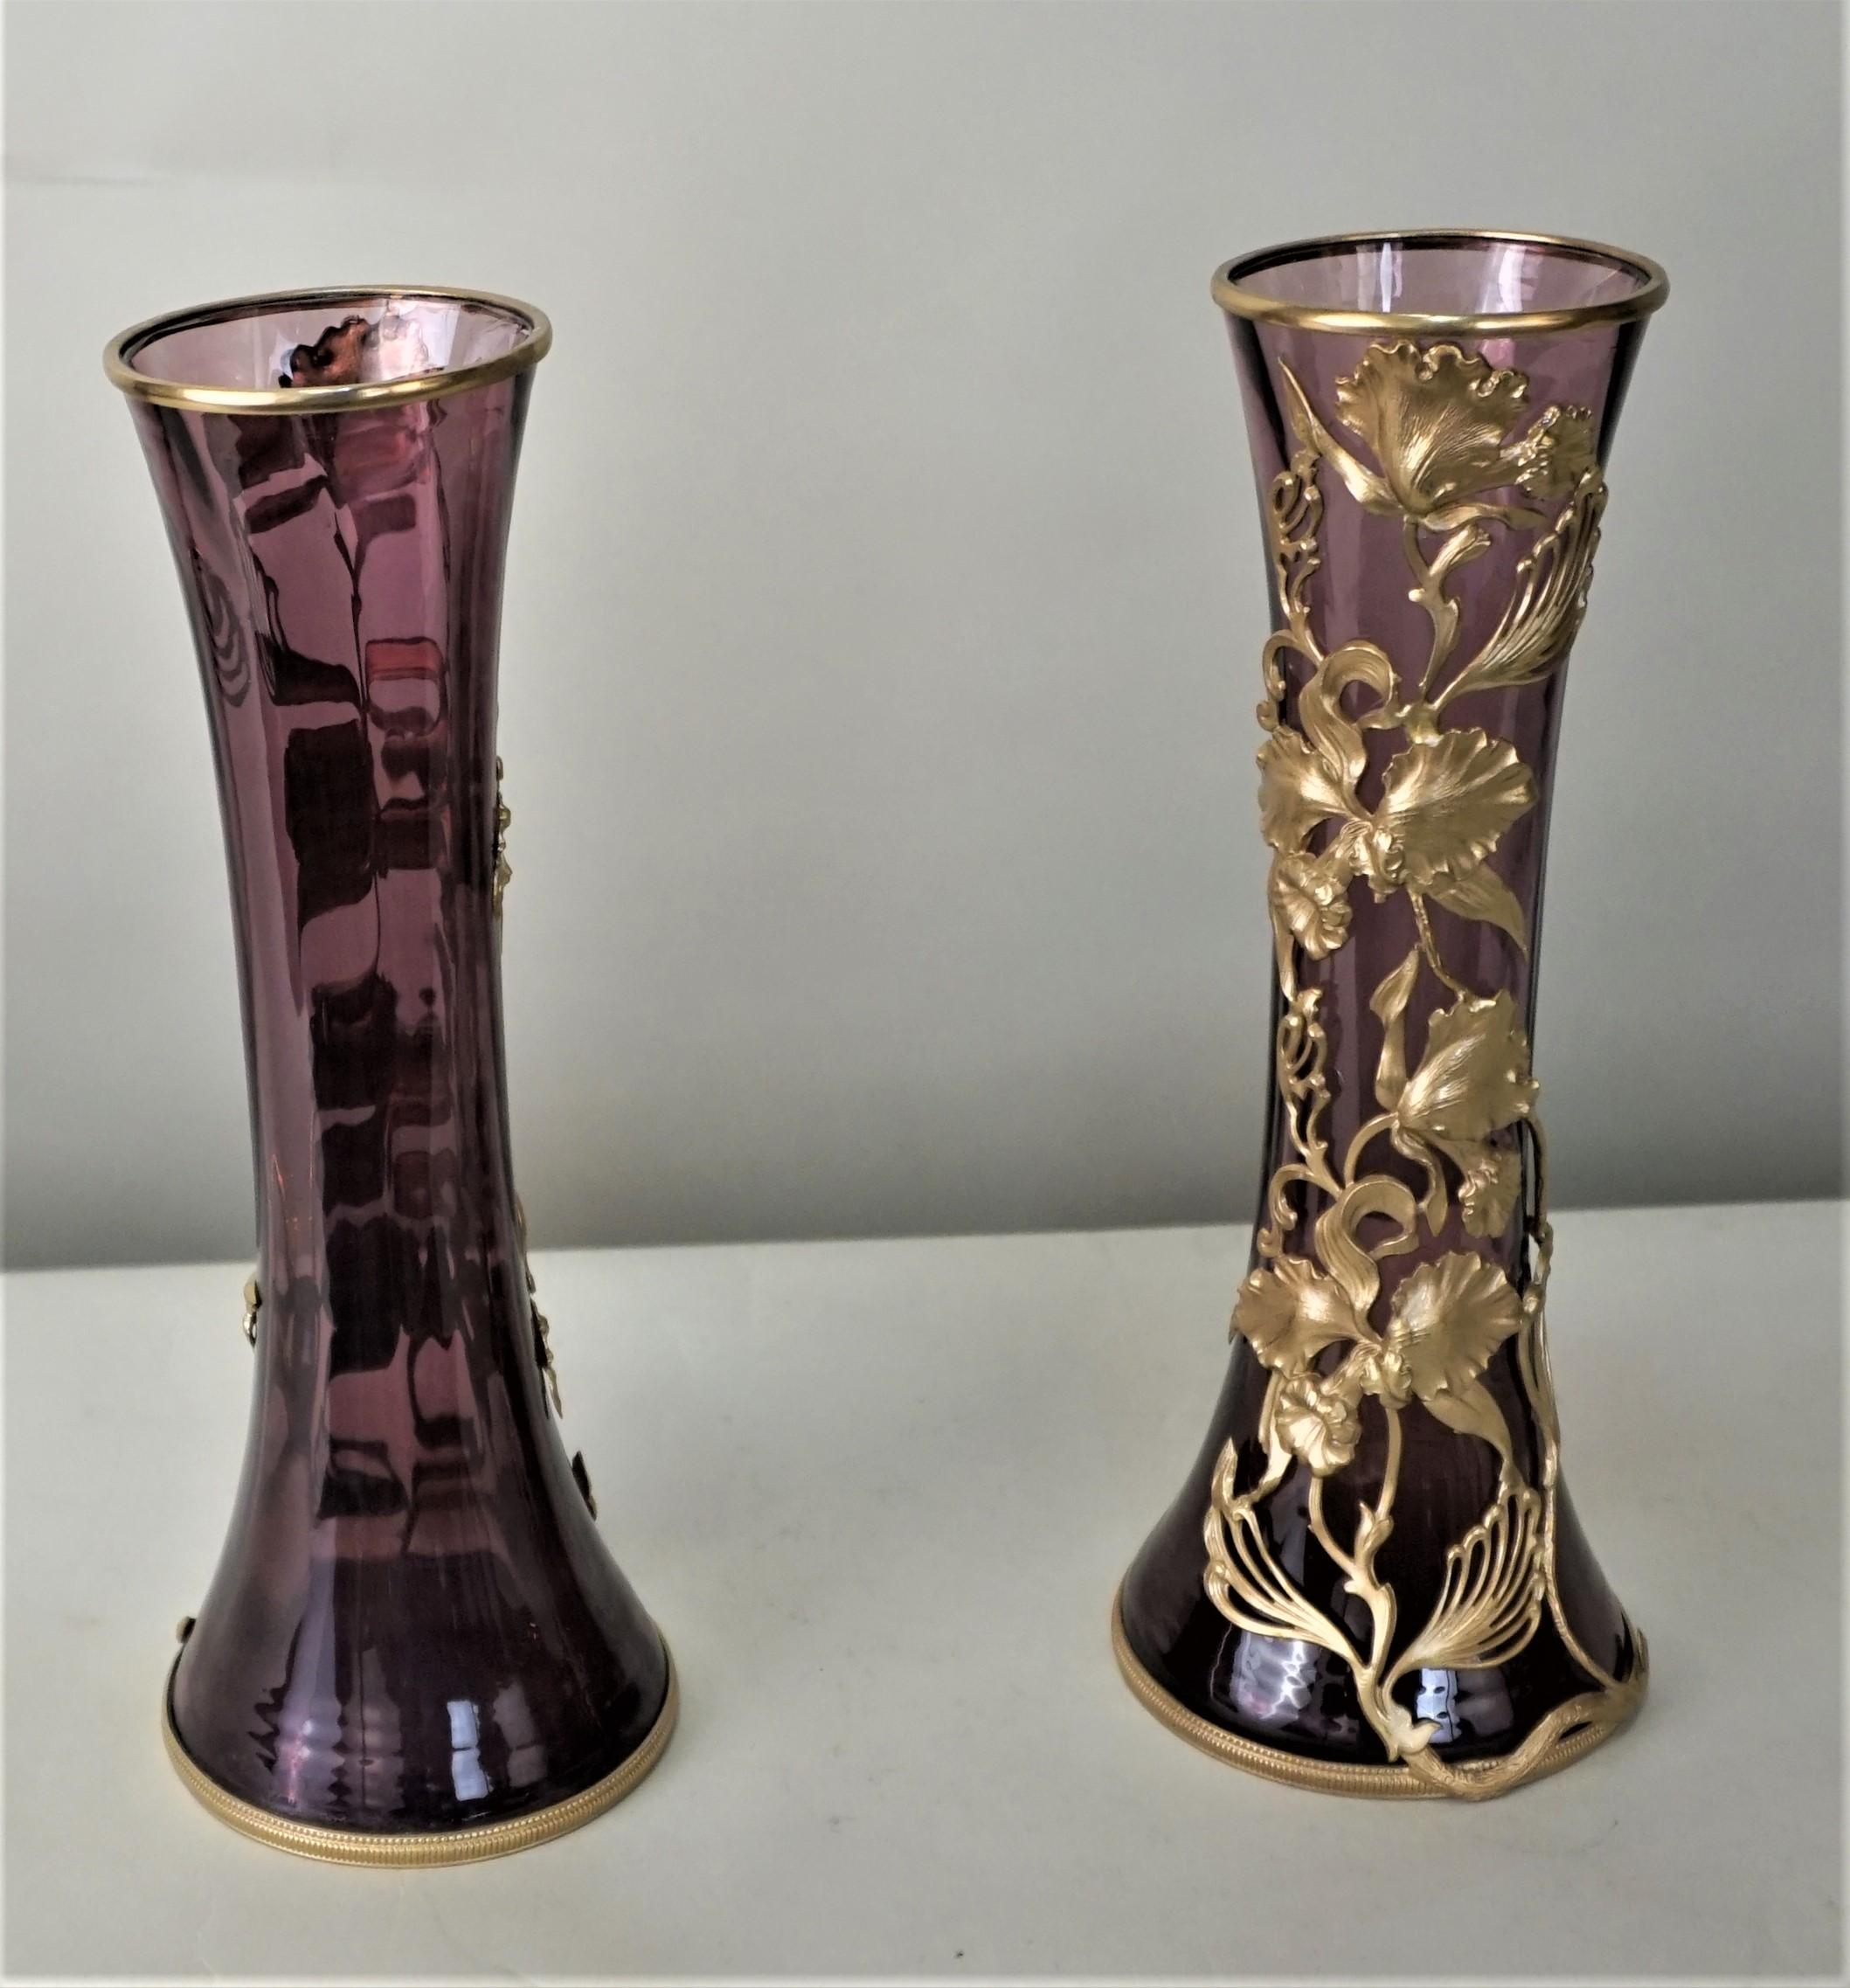 Early 20th Century Pair of Art Nouveau Glass Vases with Flower Bronze Overlay